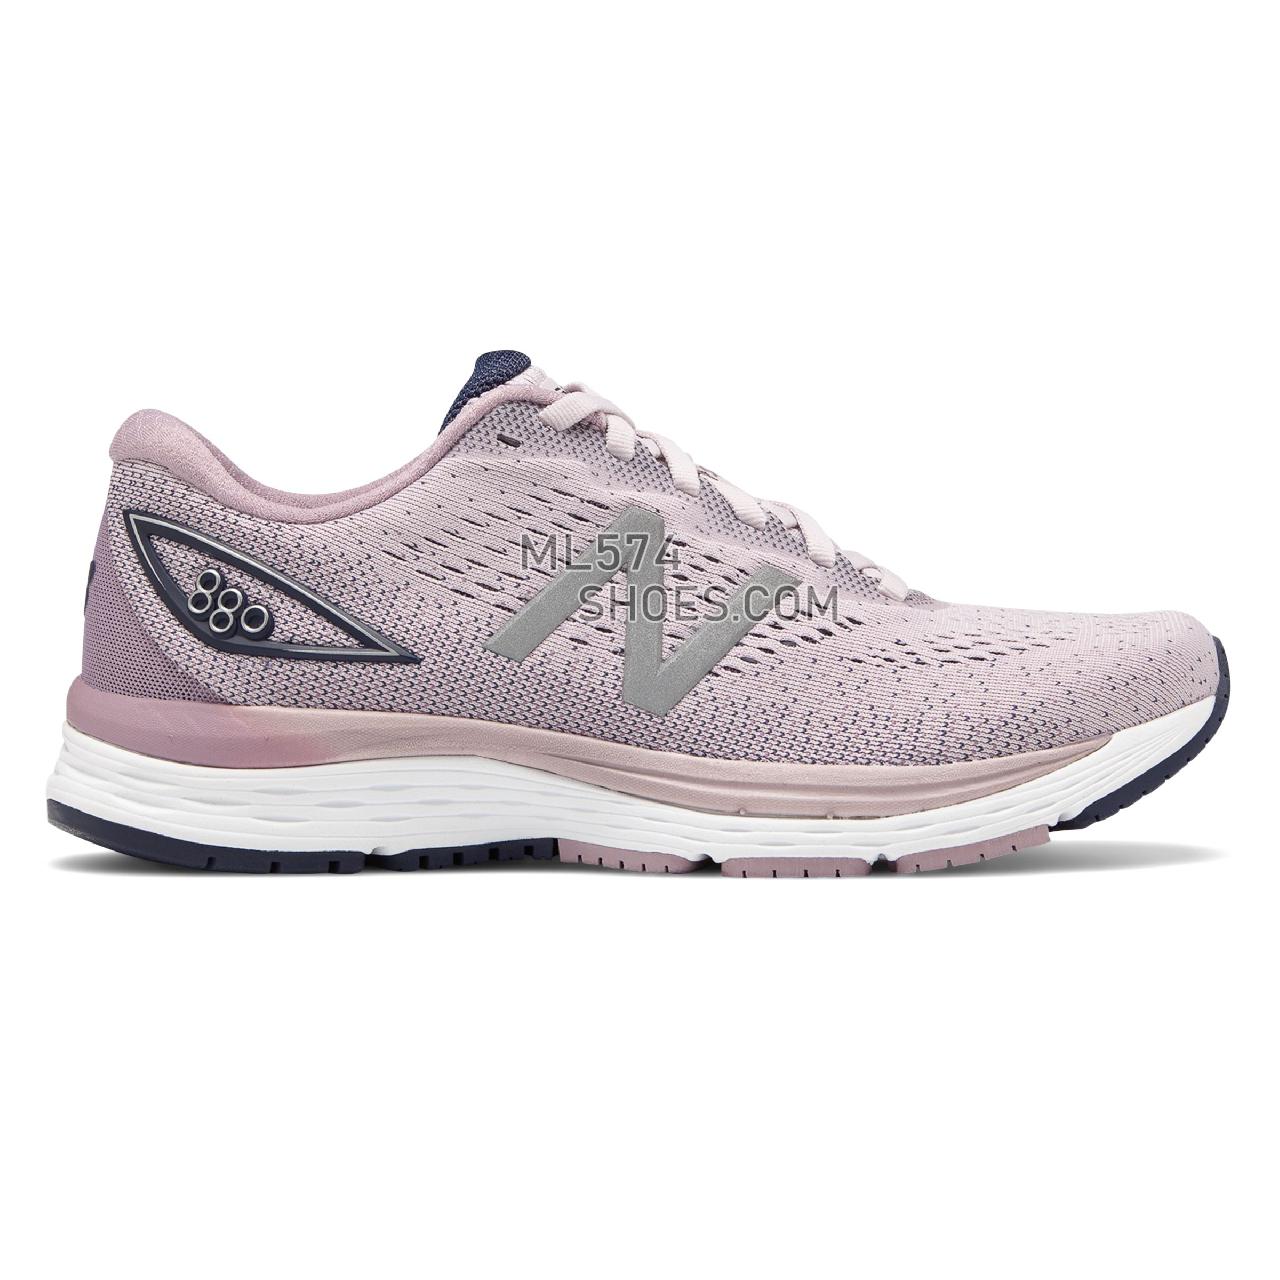 New Balance 880v9 - Women's 880v9 Running - Cashmere with Pink - W880CP9